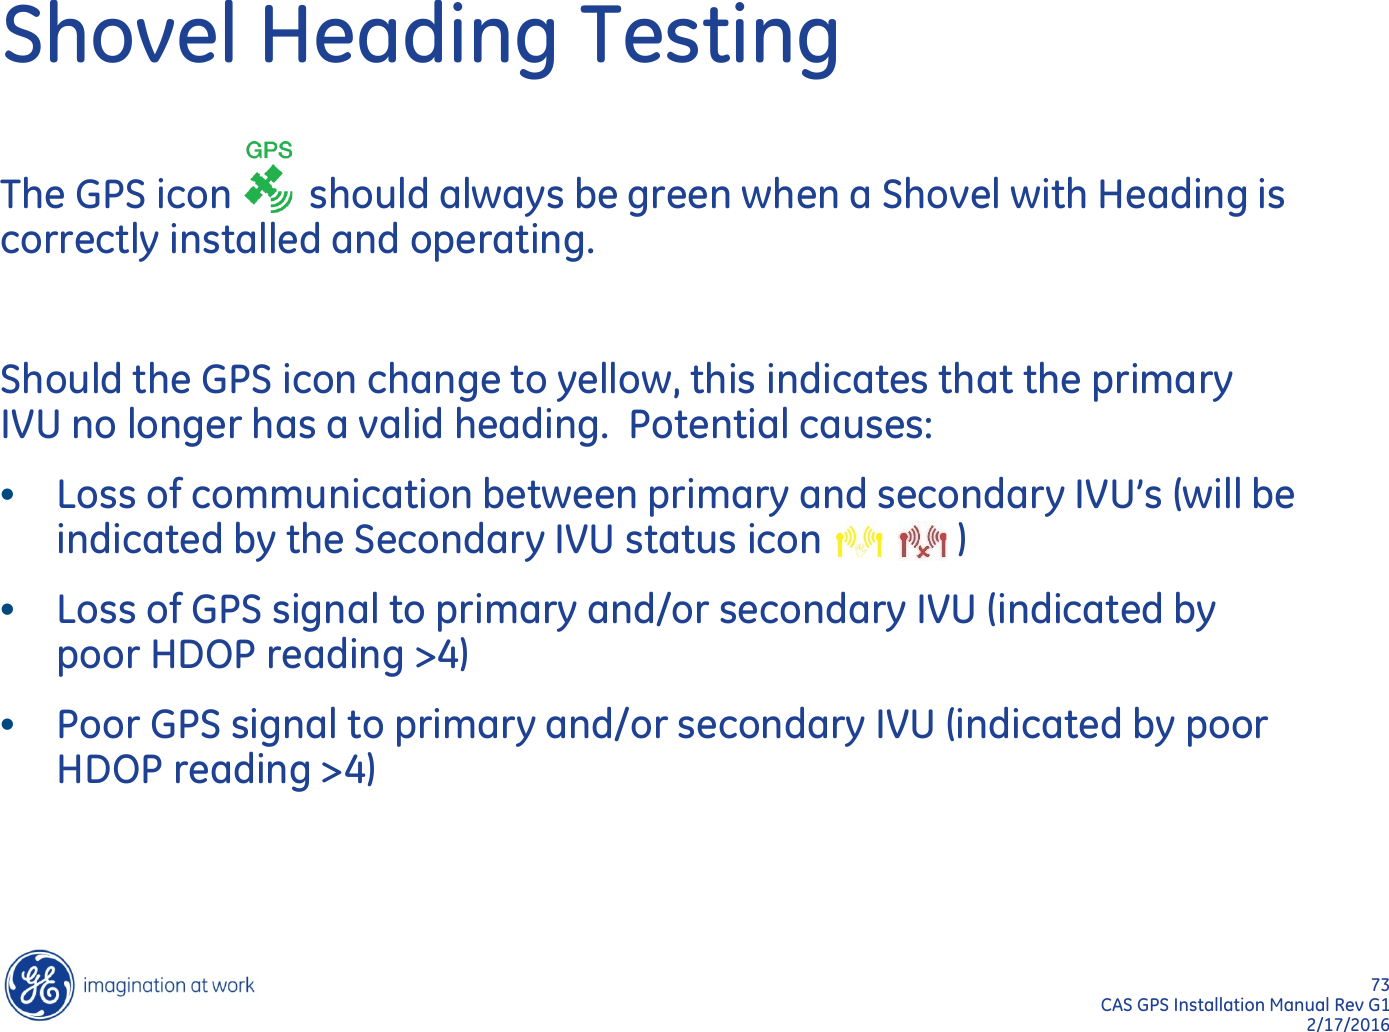 73  CAS GPS Installation Manual Rev G1 2/17/2016 Shovel Heading Testing The GPS icon        should always be green when a Shovel with Heading is correctly installed and operating.    Should the GPS icon change to yellow, this indicates that the primary IVU no longer has a valid heading.  Potential causes: •Loss of communication between primary and secondary IVU’s (will be indicated by the Secondary IVU status icon              ) •Loss of GPS signal to primary and/or secondary IVU (indicated by poor HDOP reading &gt;4) •Poor GPS signal to primary and/or secondary IVU (indicated by poor HDOP reading &gt;4) 